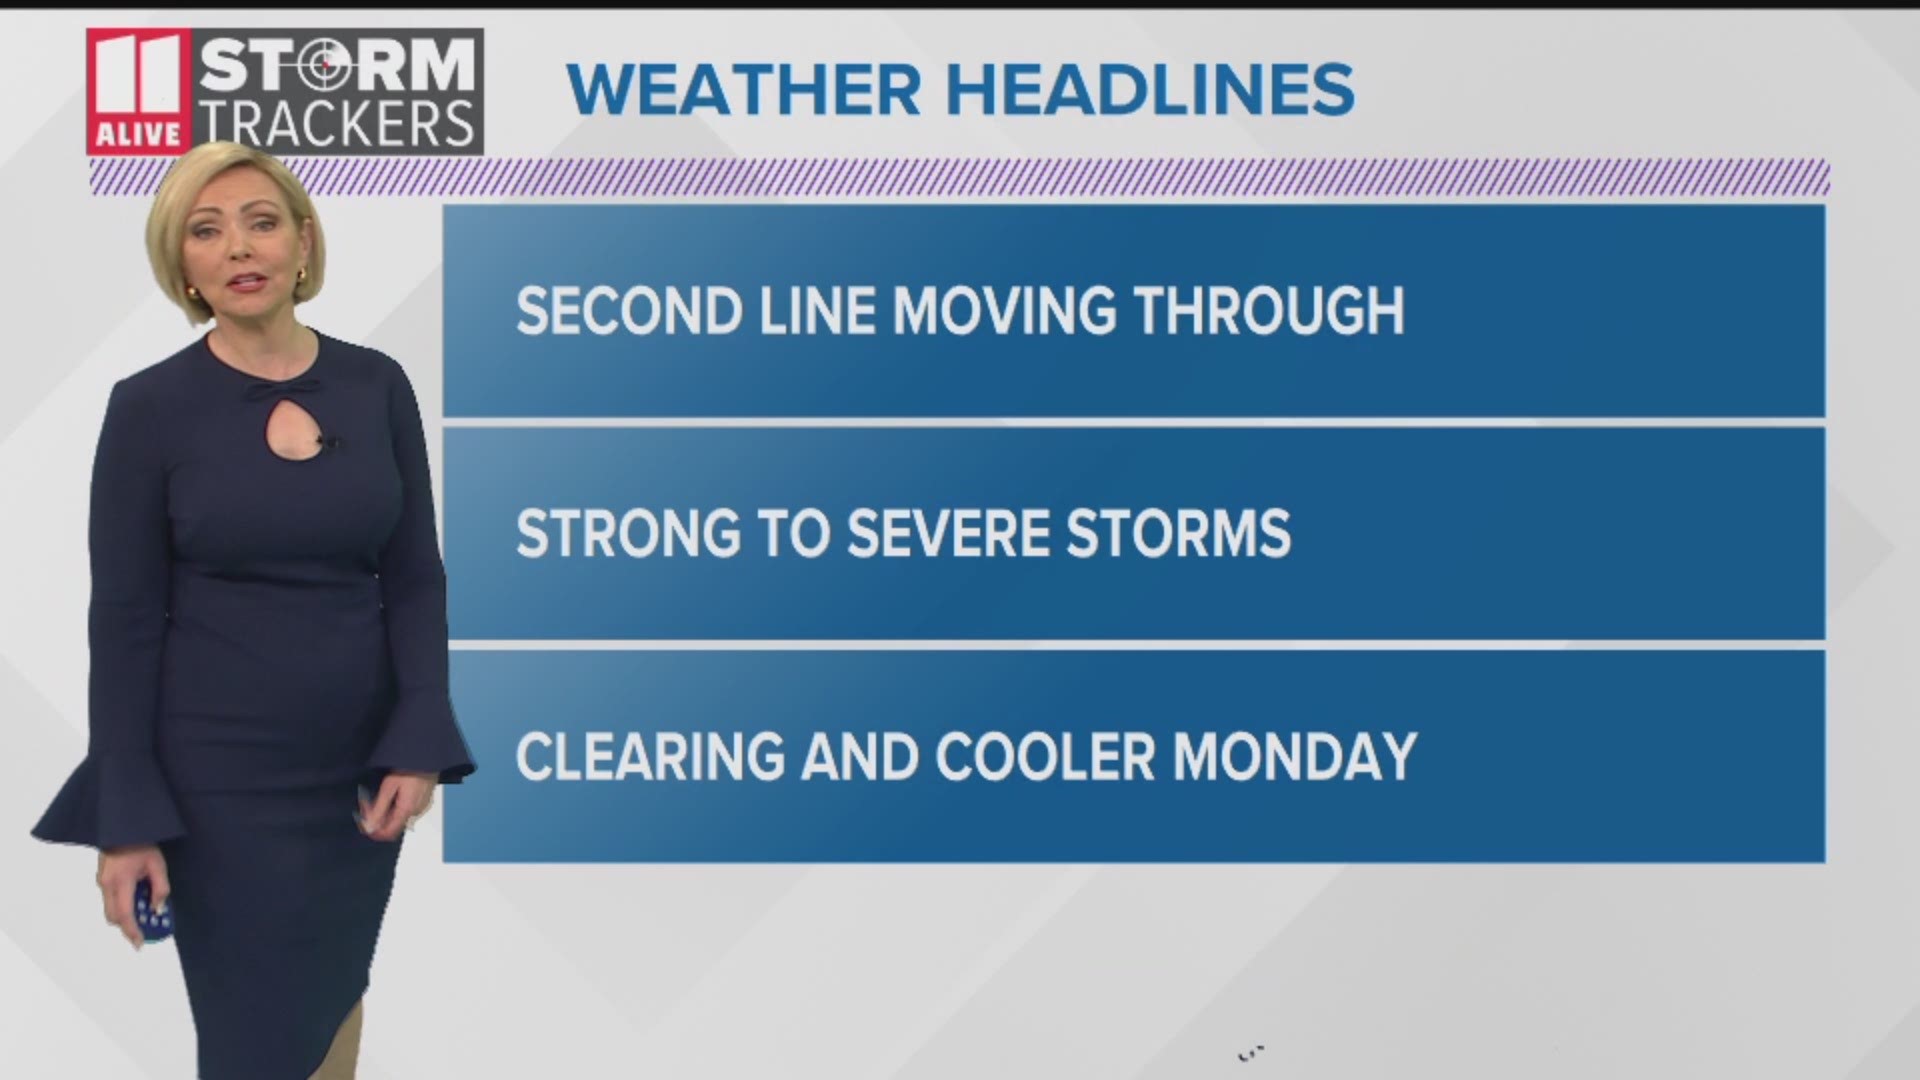 11Alive StormTracker and meteorologist Samantha Mohr has the latest forecast for Sunday, April 14, 2019.